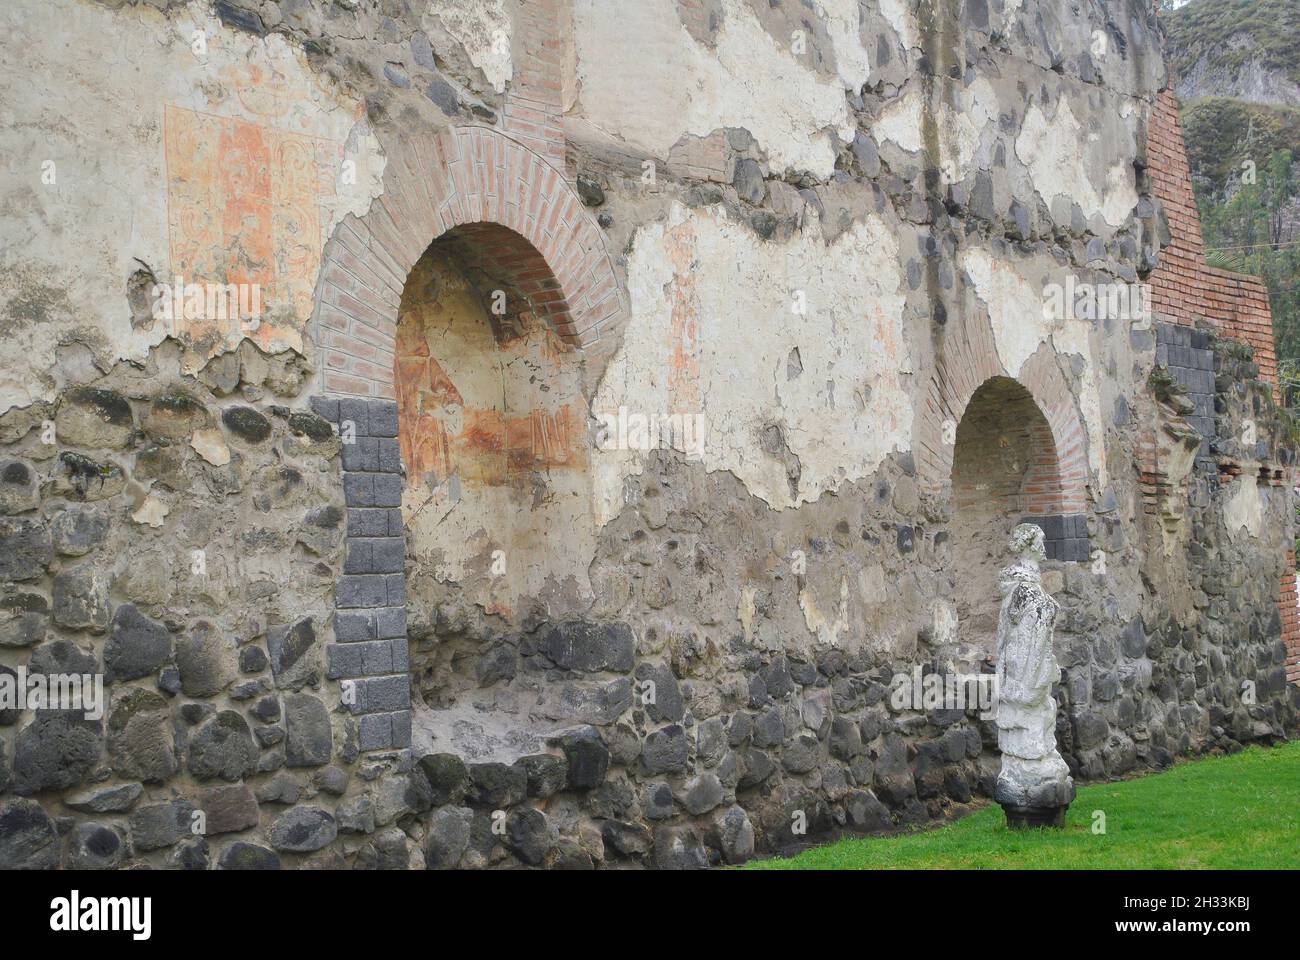 Ruins of the Monastery of the Assumption, which correspond to the first Franciscan Church built in Guano.  Guano, Chimborazo, Ecuador Stock Photo